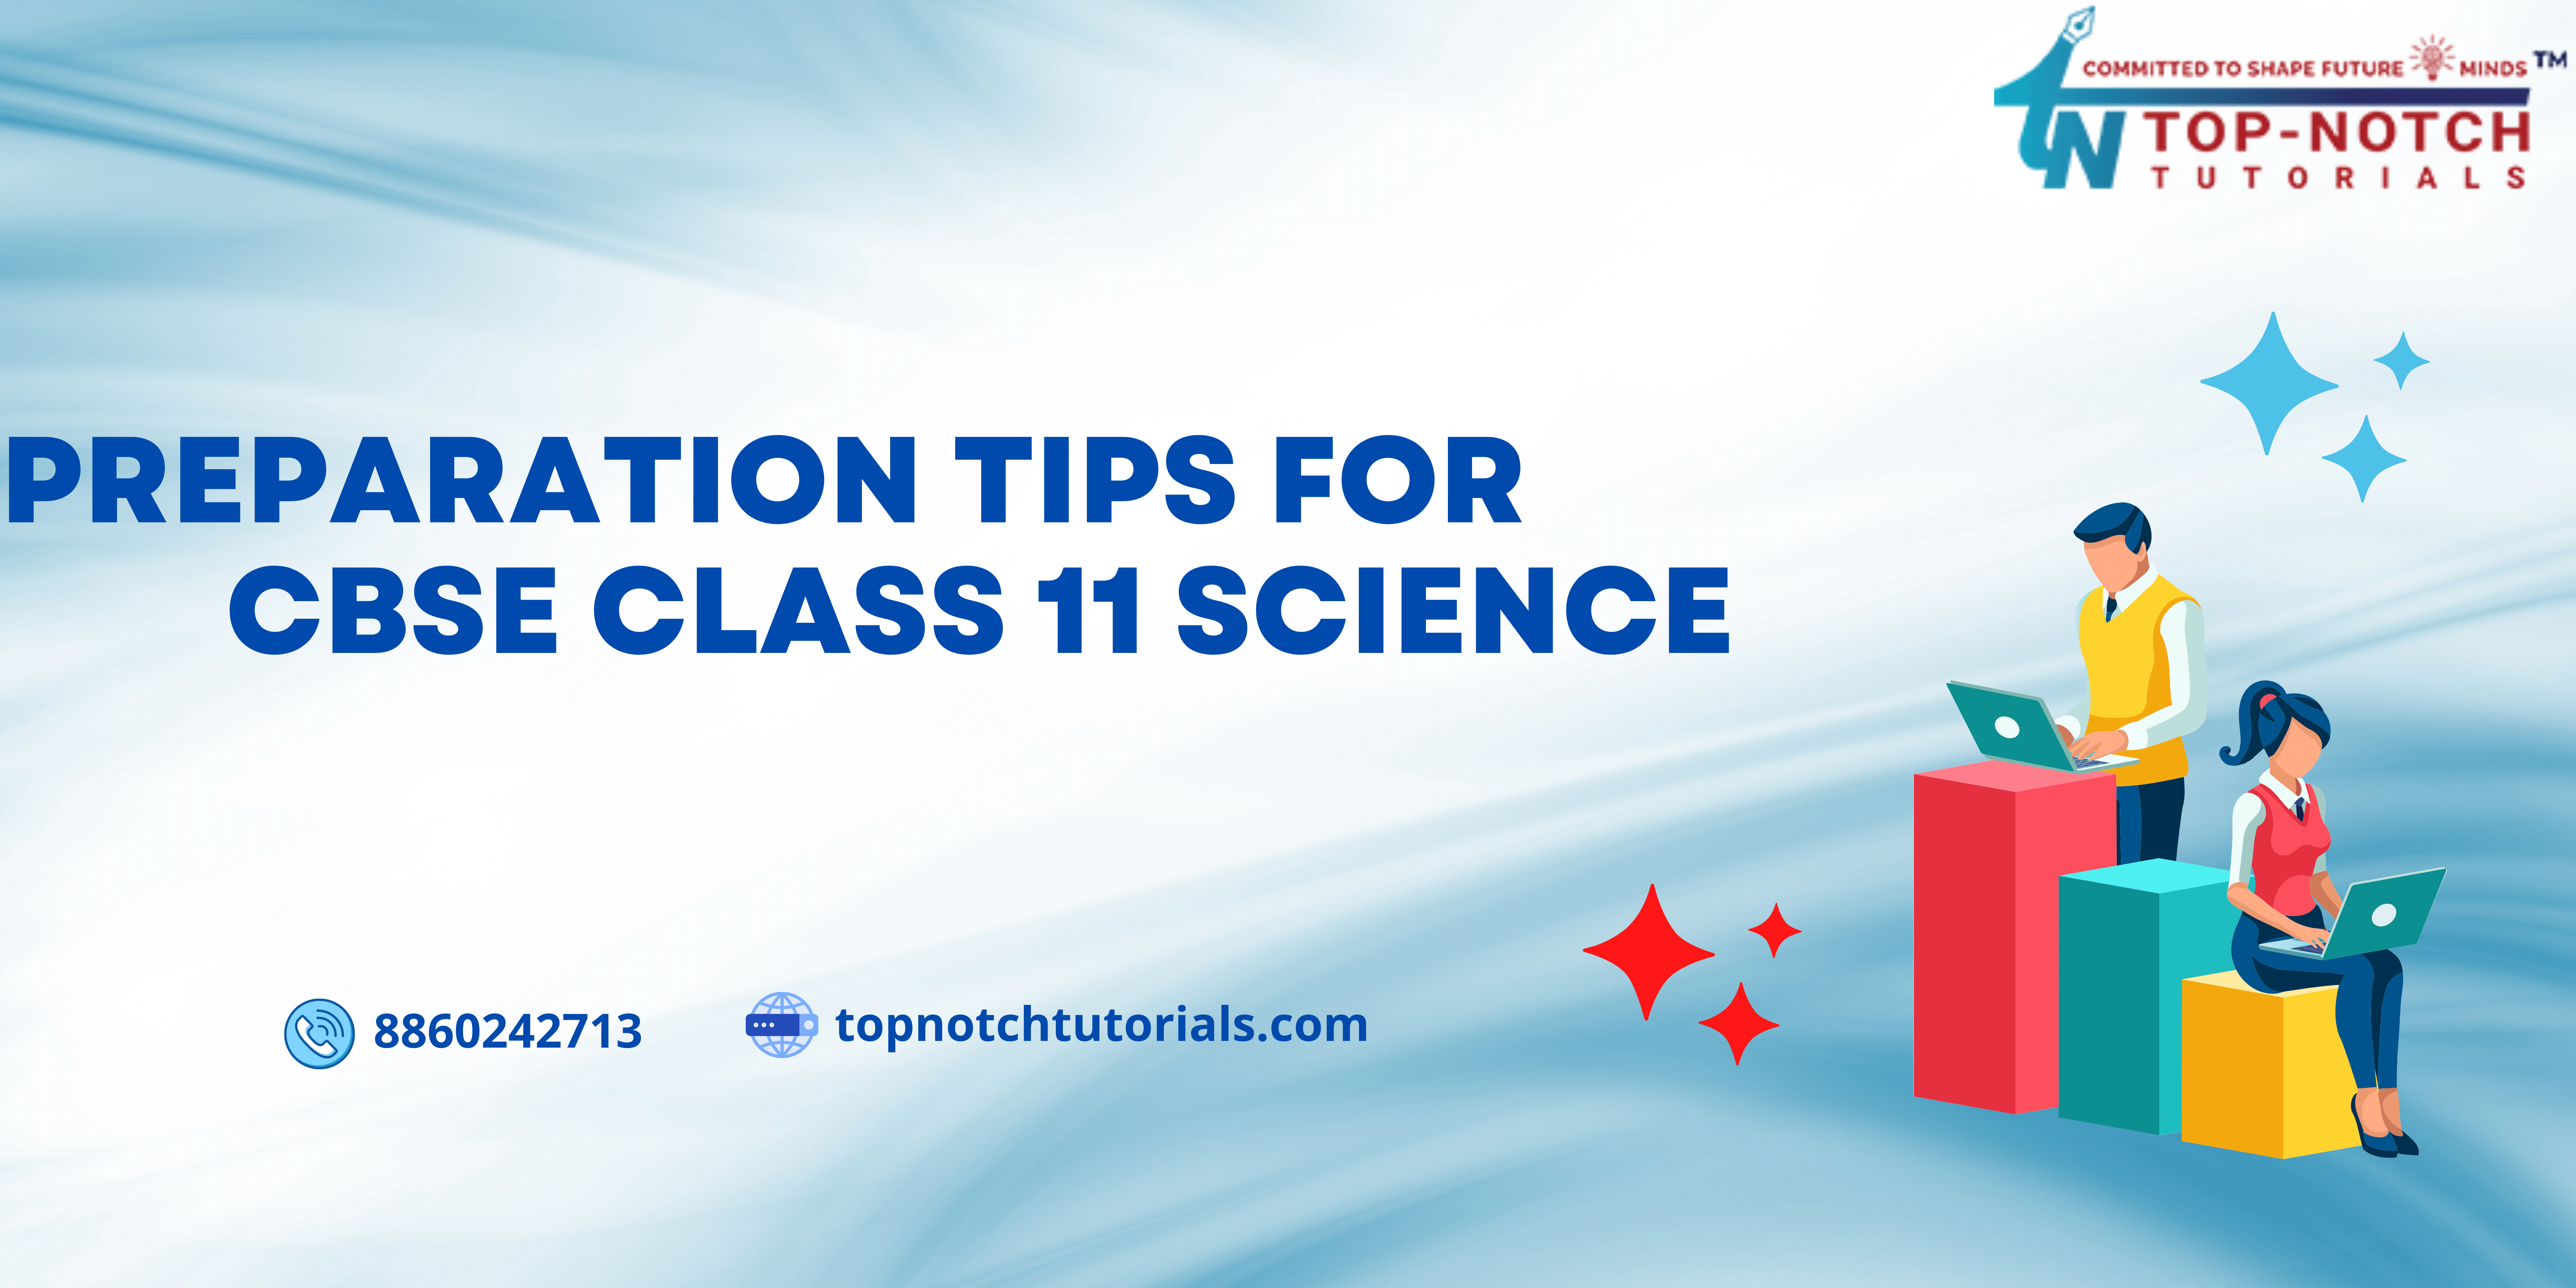 Preparation Tips for CBSE Class 11 Science